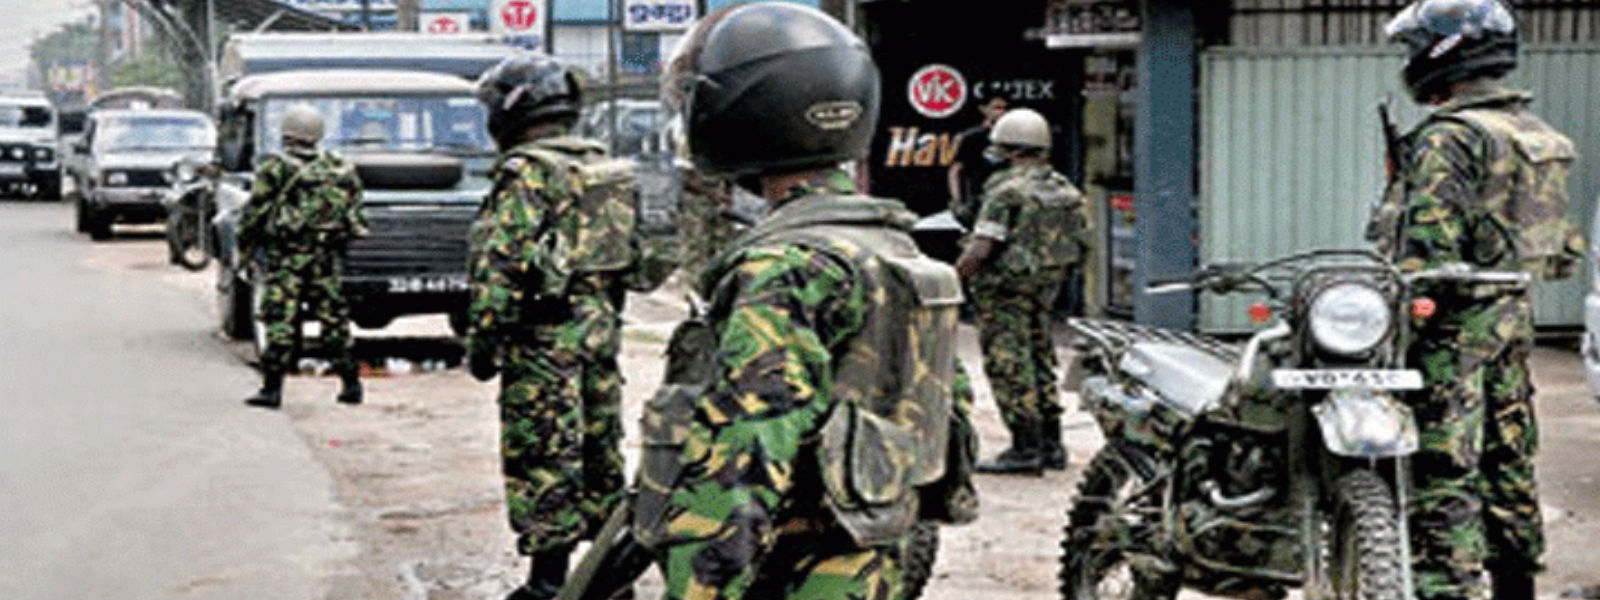 STF on the hunt for underworld leaders